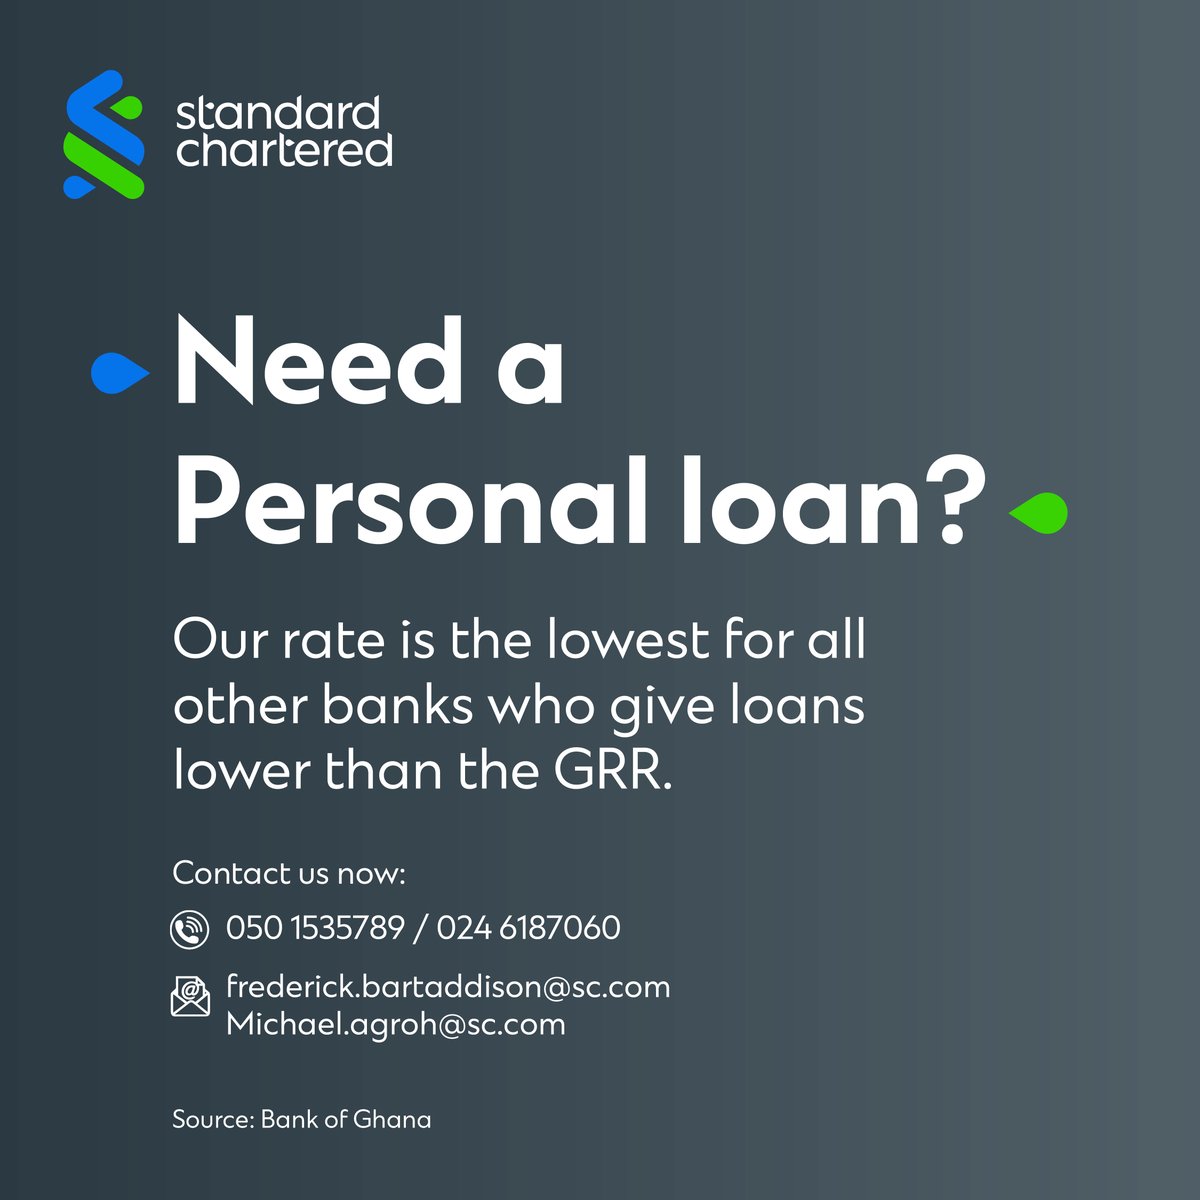 We remain your best option for personal loans. Reach out to us now. Simply call us at 050 1535789 or 024 6187060 or click on the link: bit.ly/4bbFq8i to get started. Email us - frederick.bartaddison@sc.com or Michael.agroh@sc.com #StanChartGhana